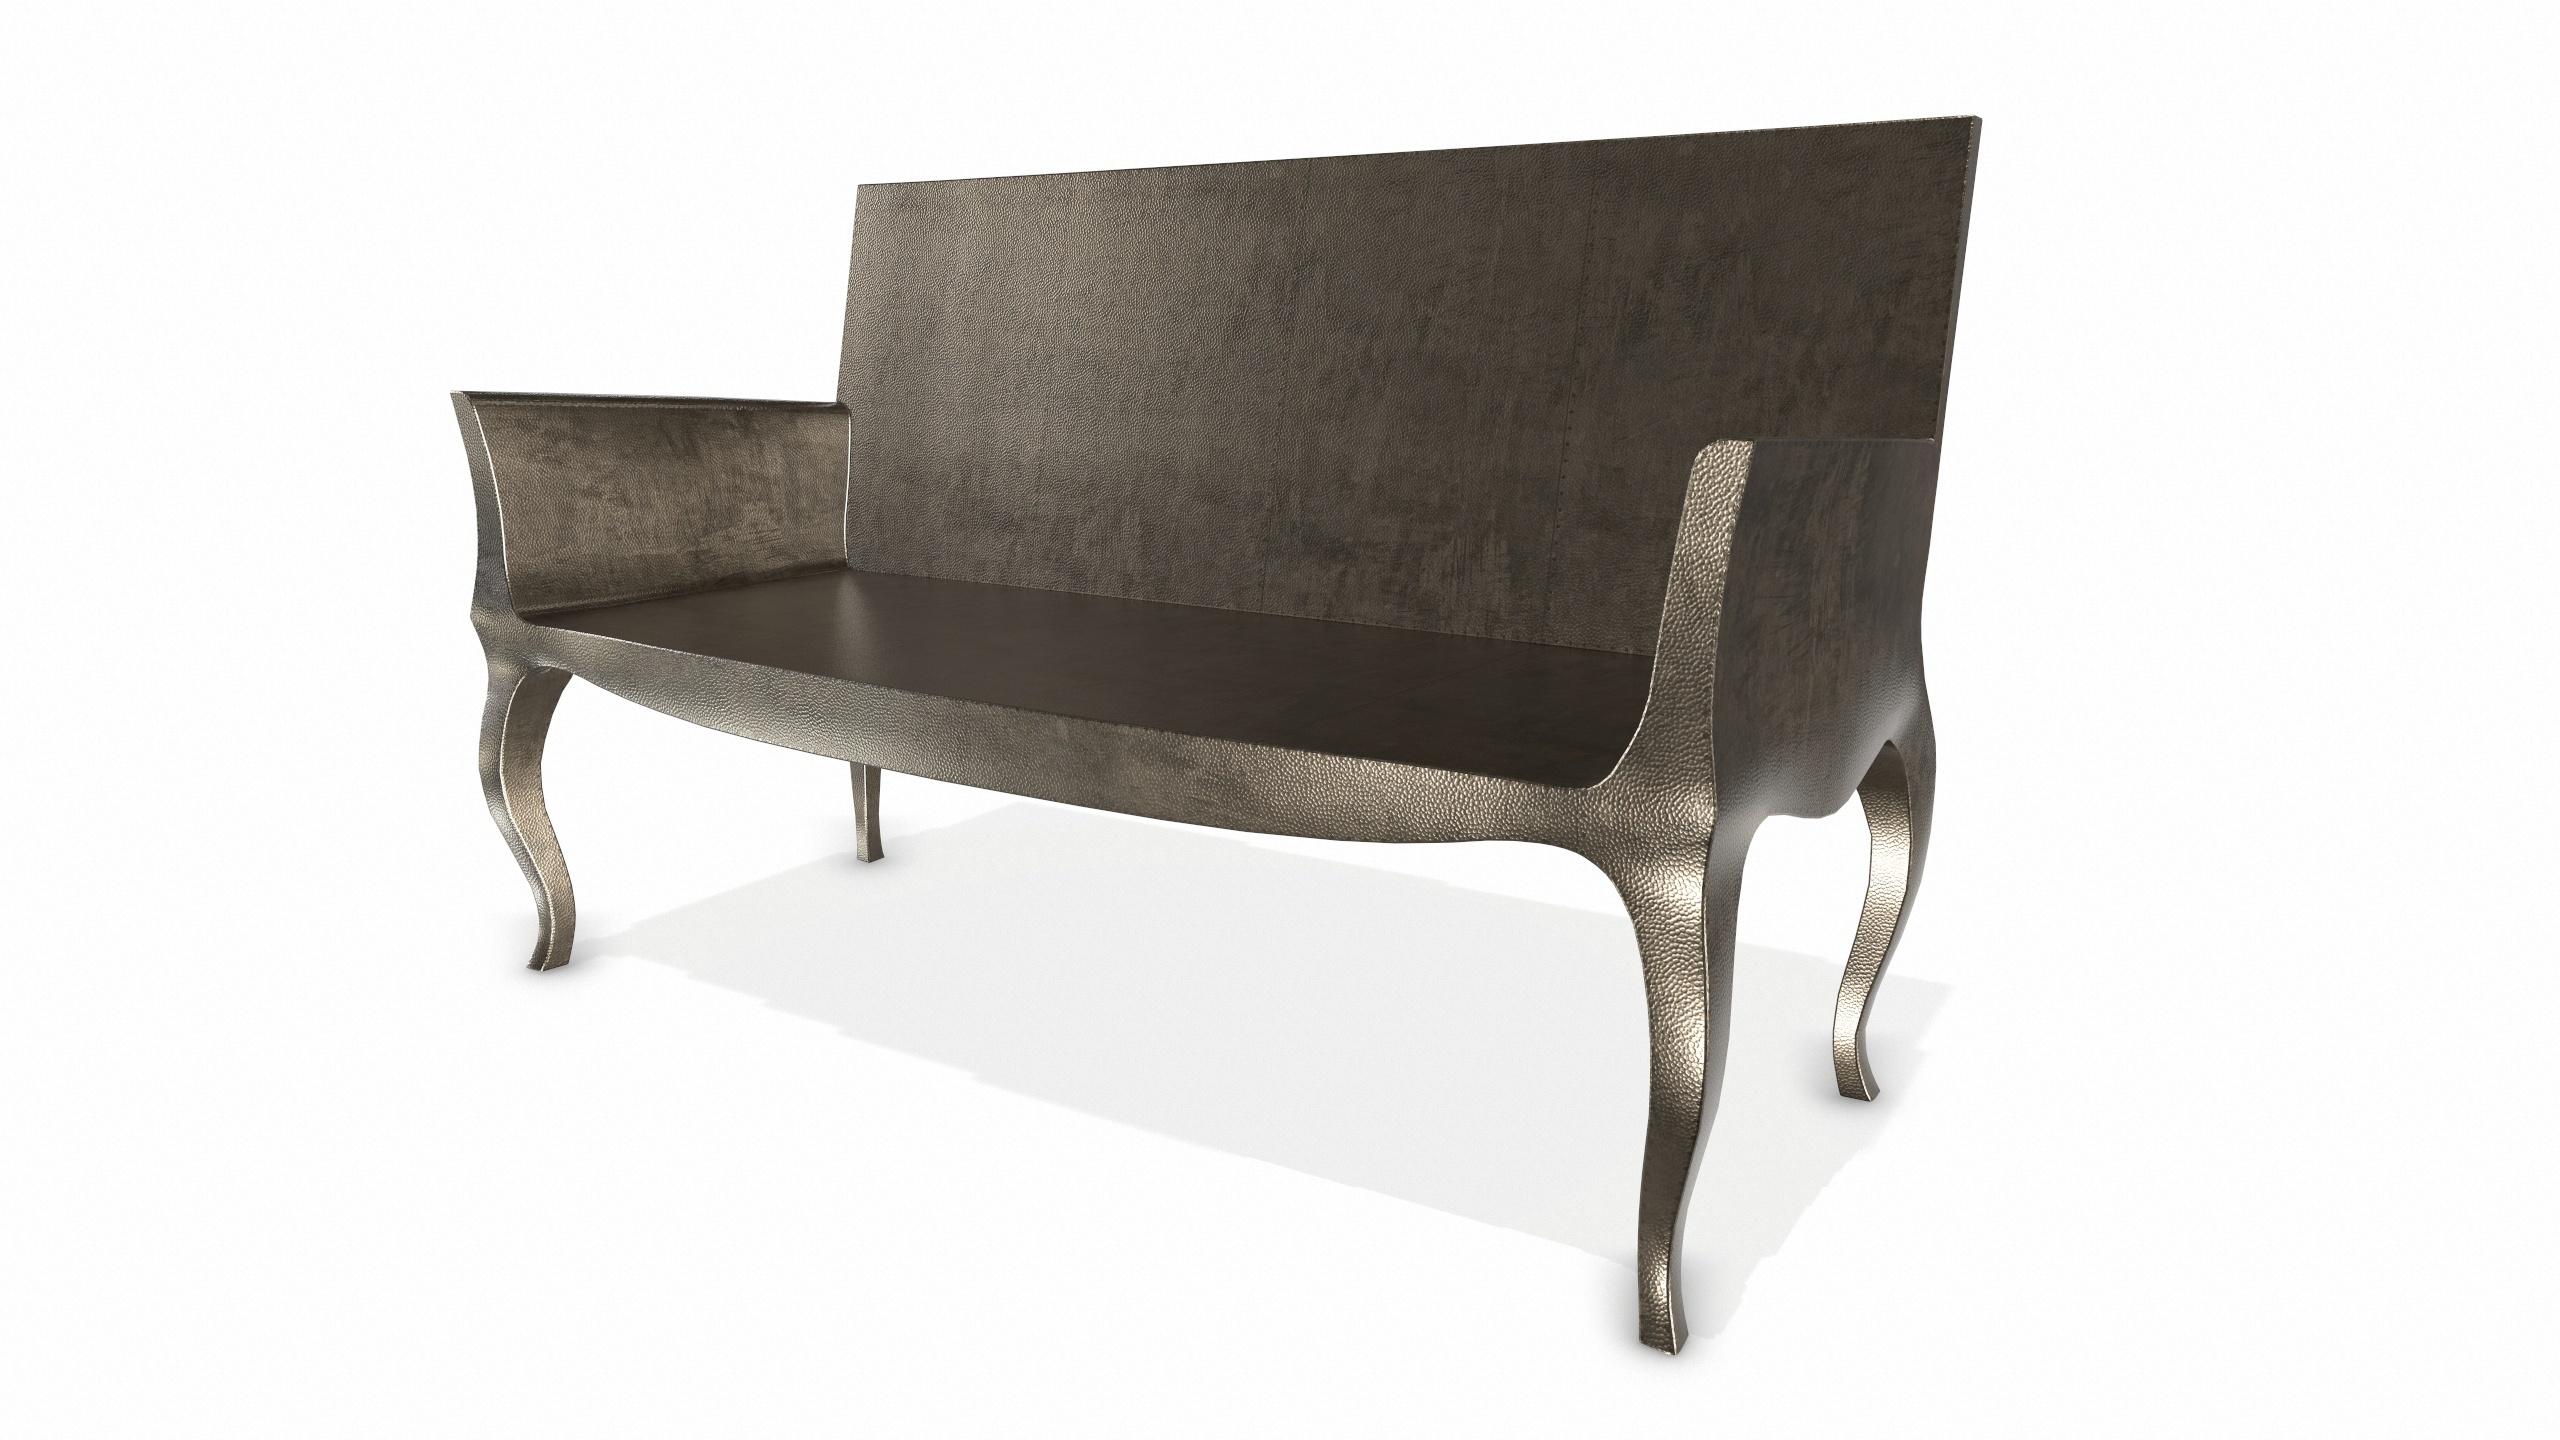 American Louise Settee Art Deco Daybeds in Mid. Hammered Antique Bronze by Paul Mathieu  For Sale